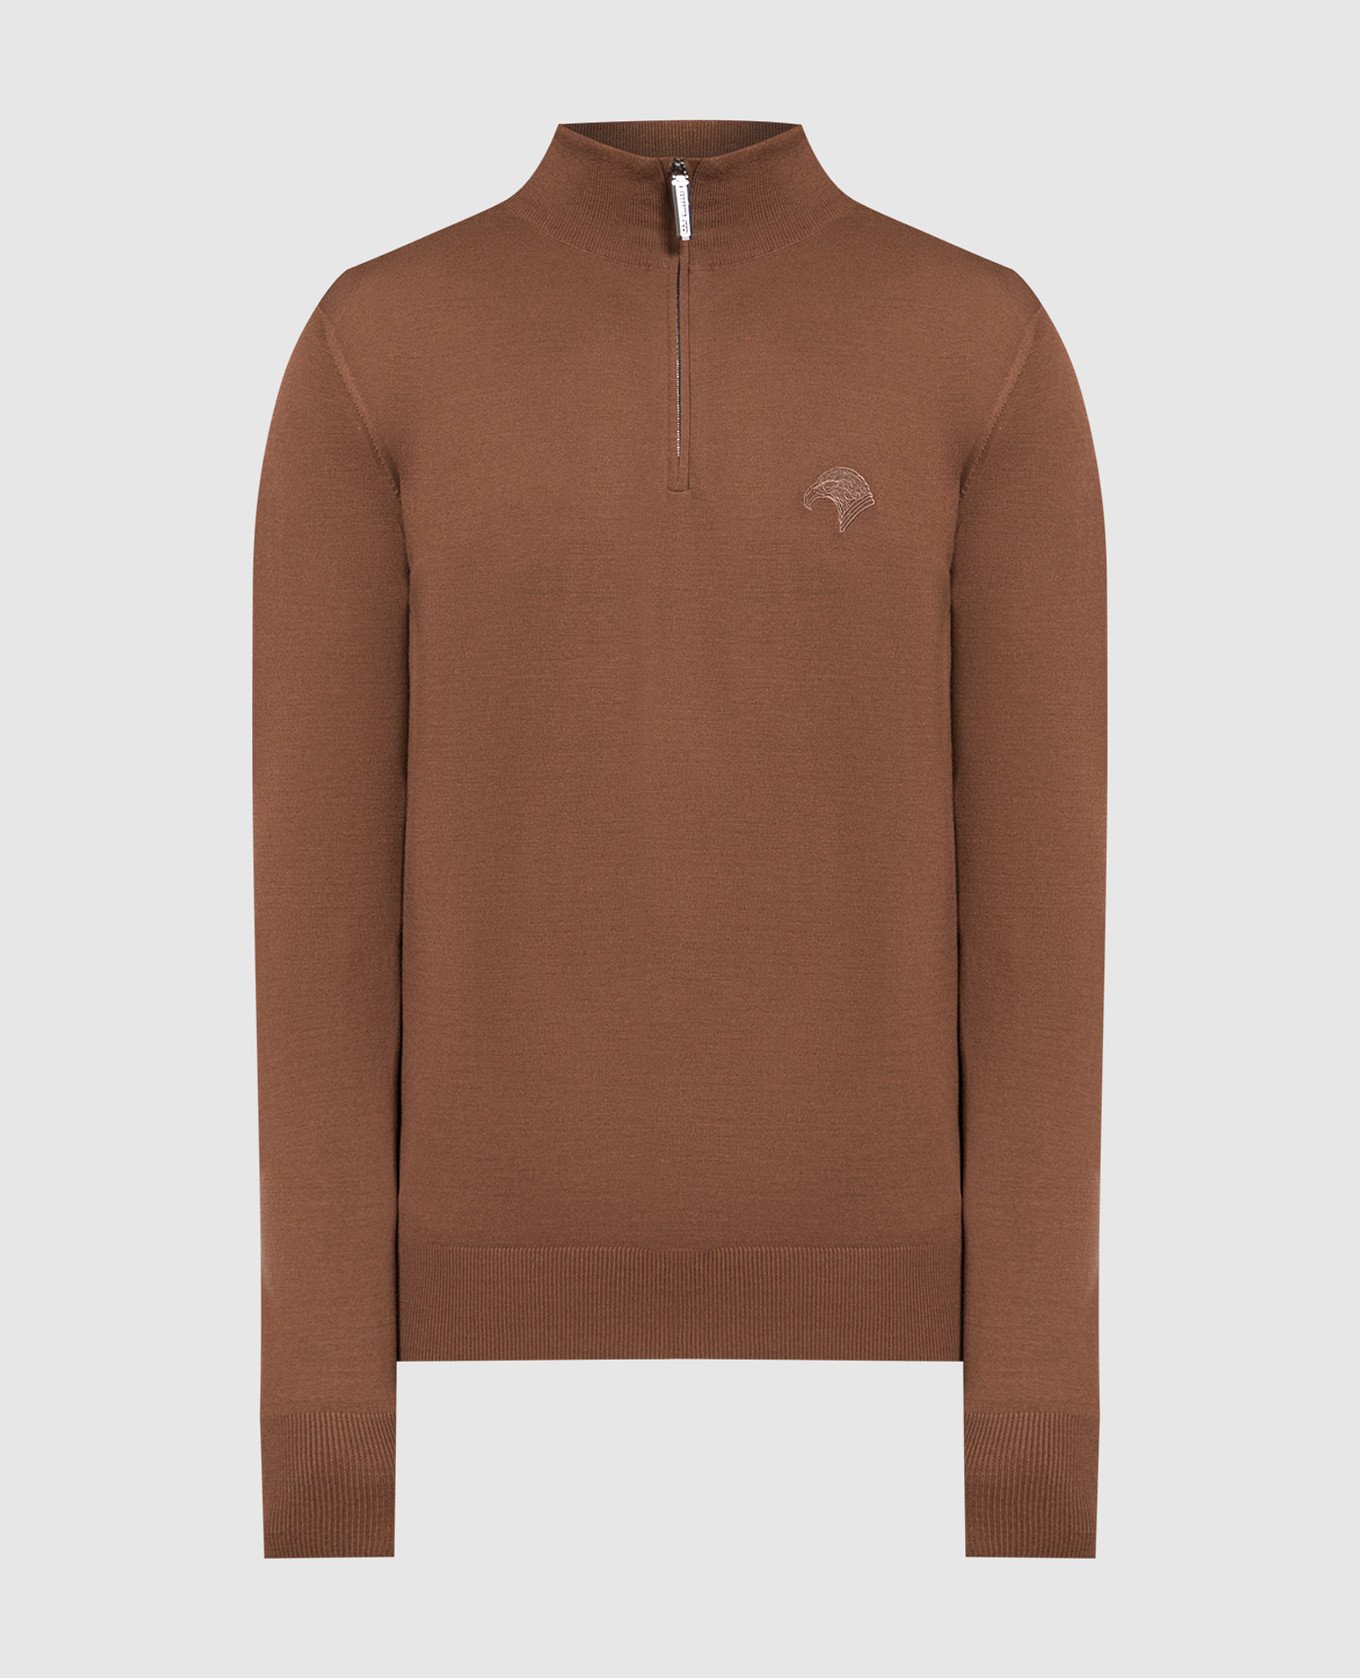 Brown wool jumper with logo embroidery